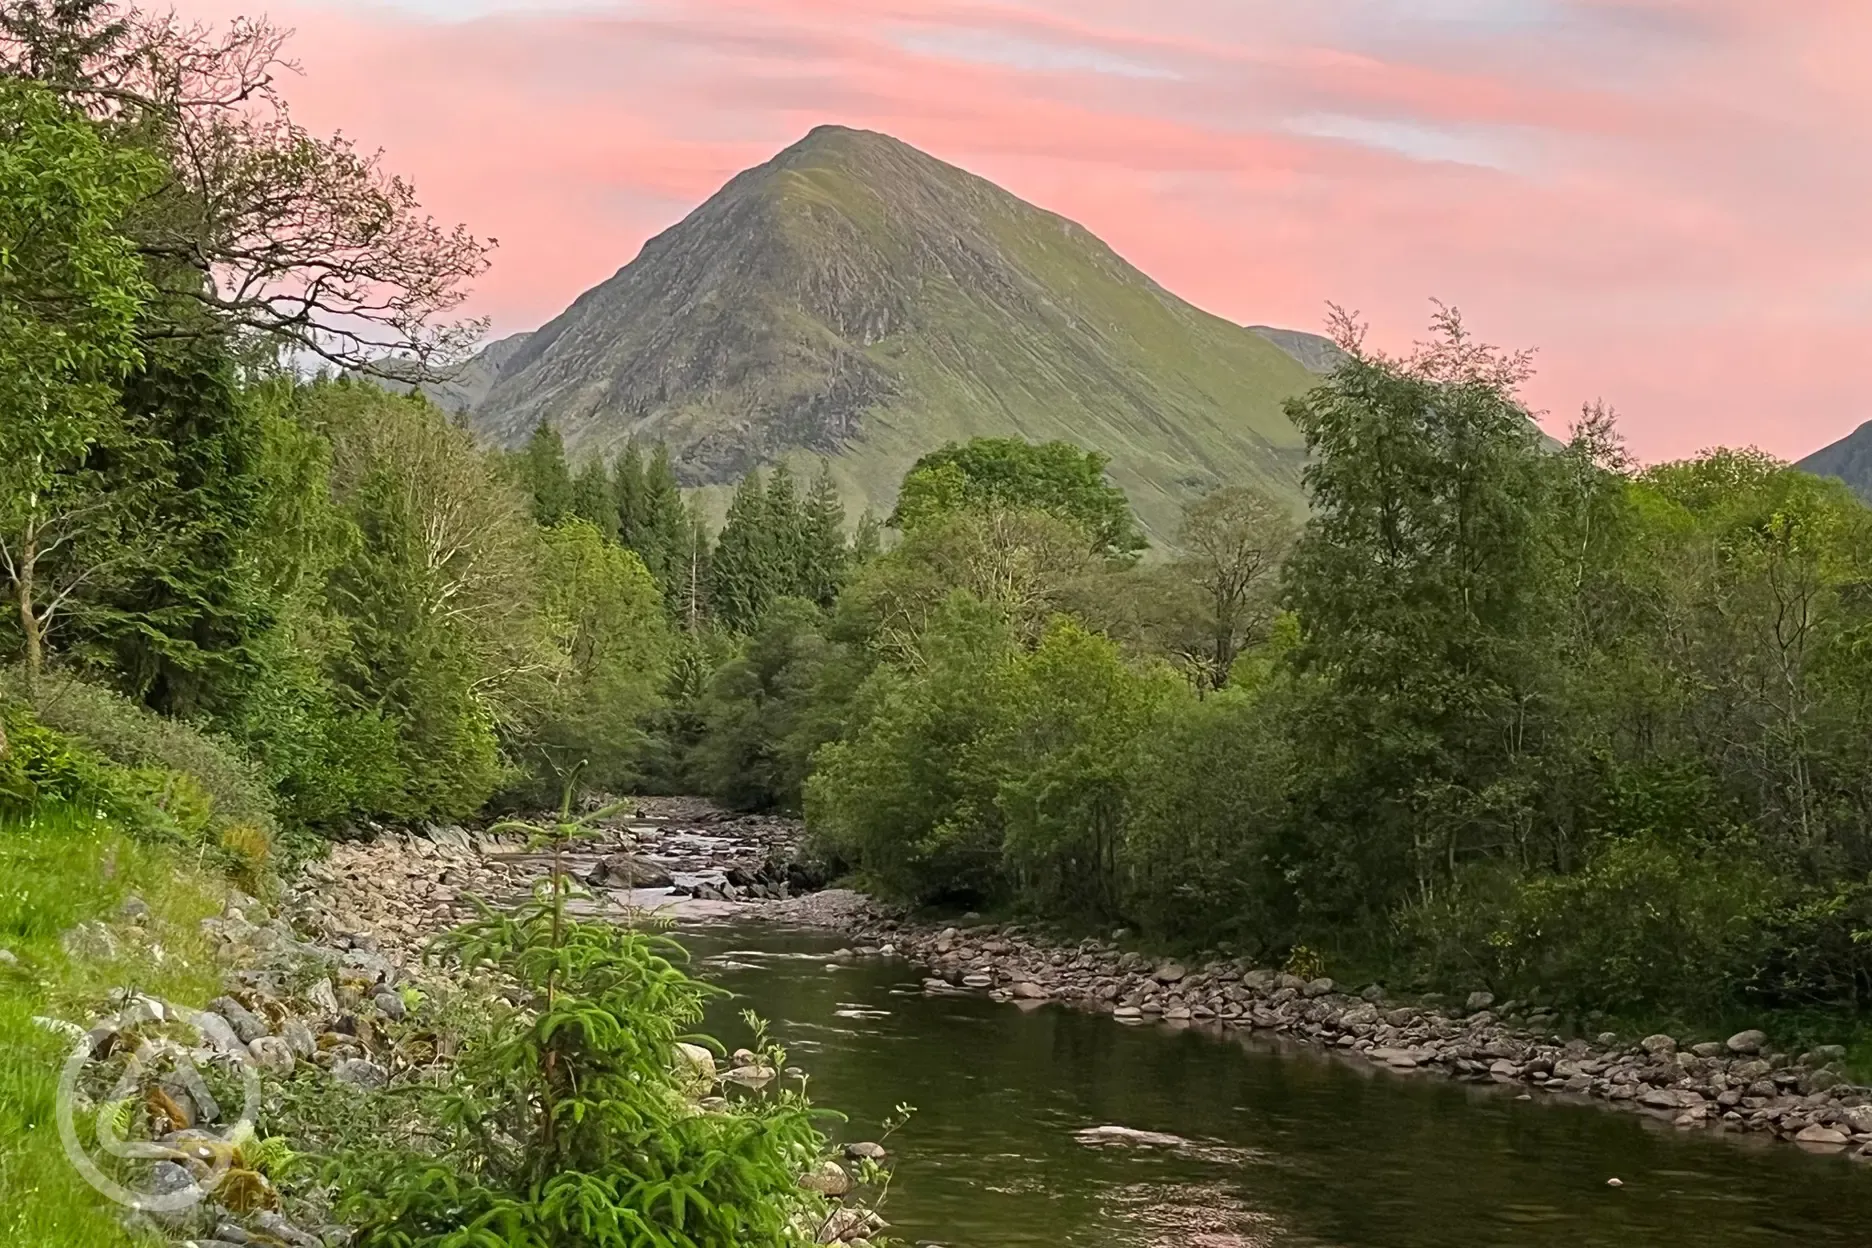 Sunset over the River Coe